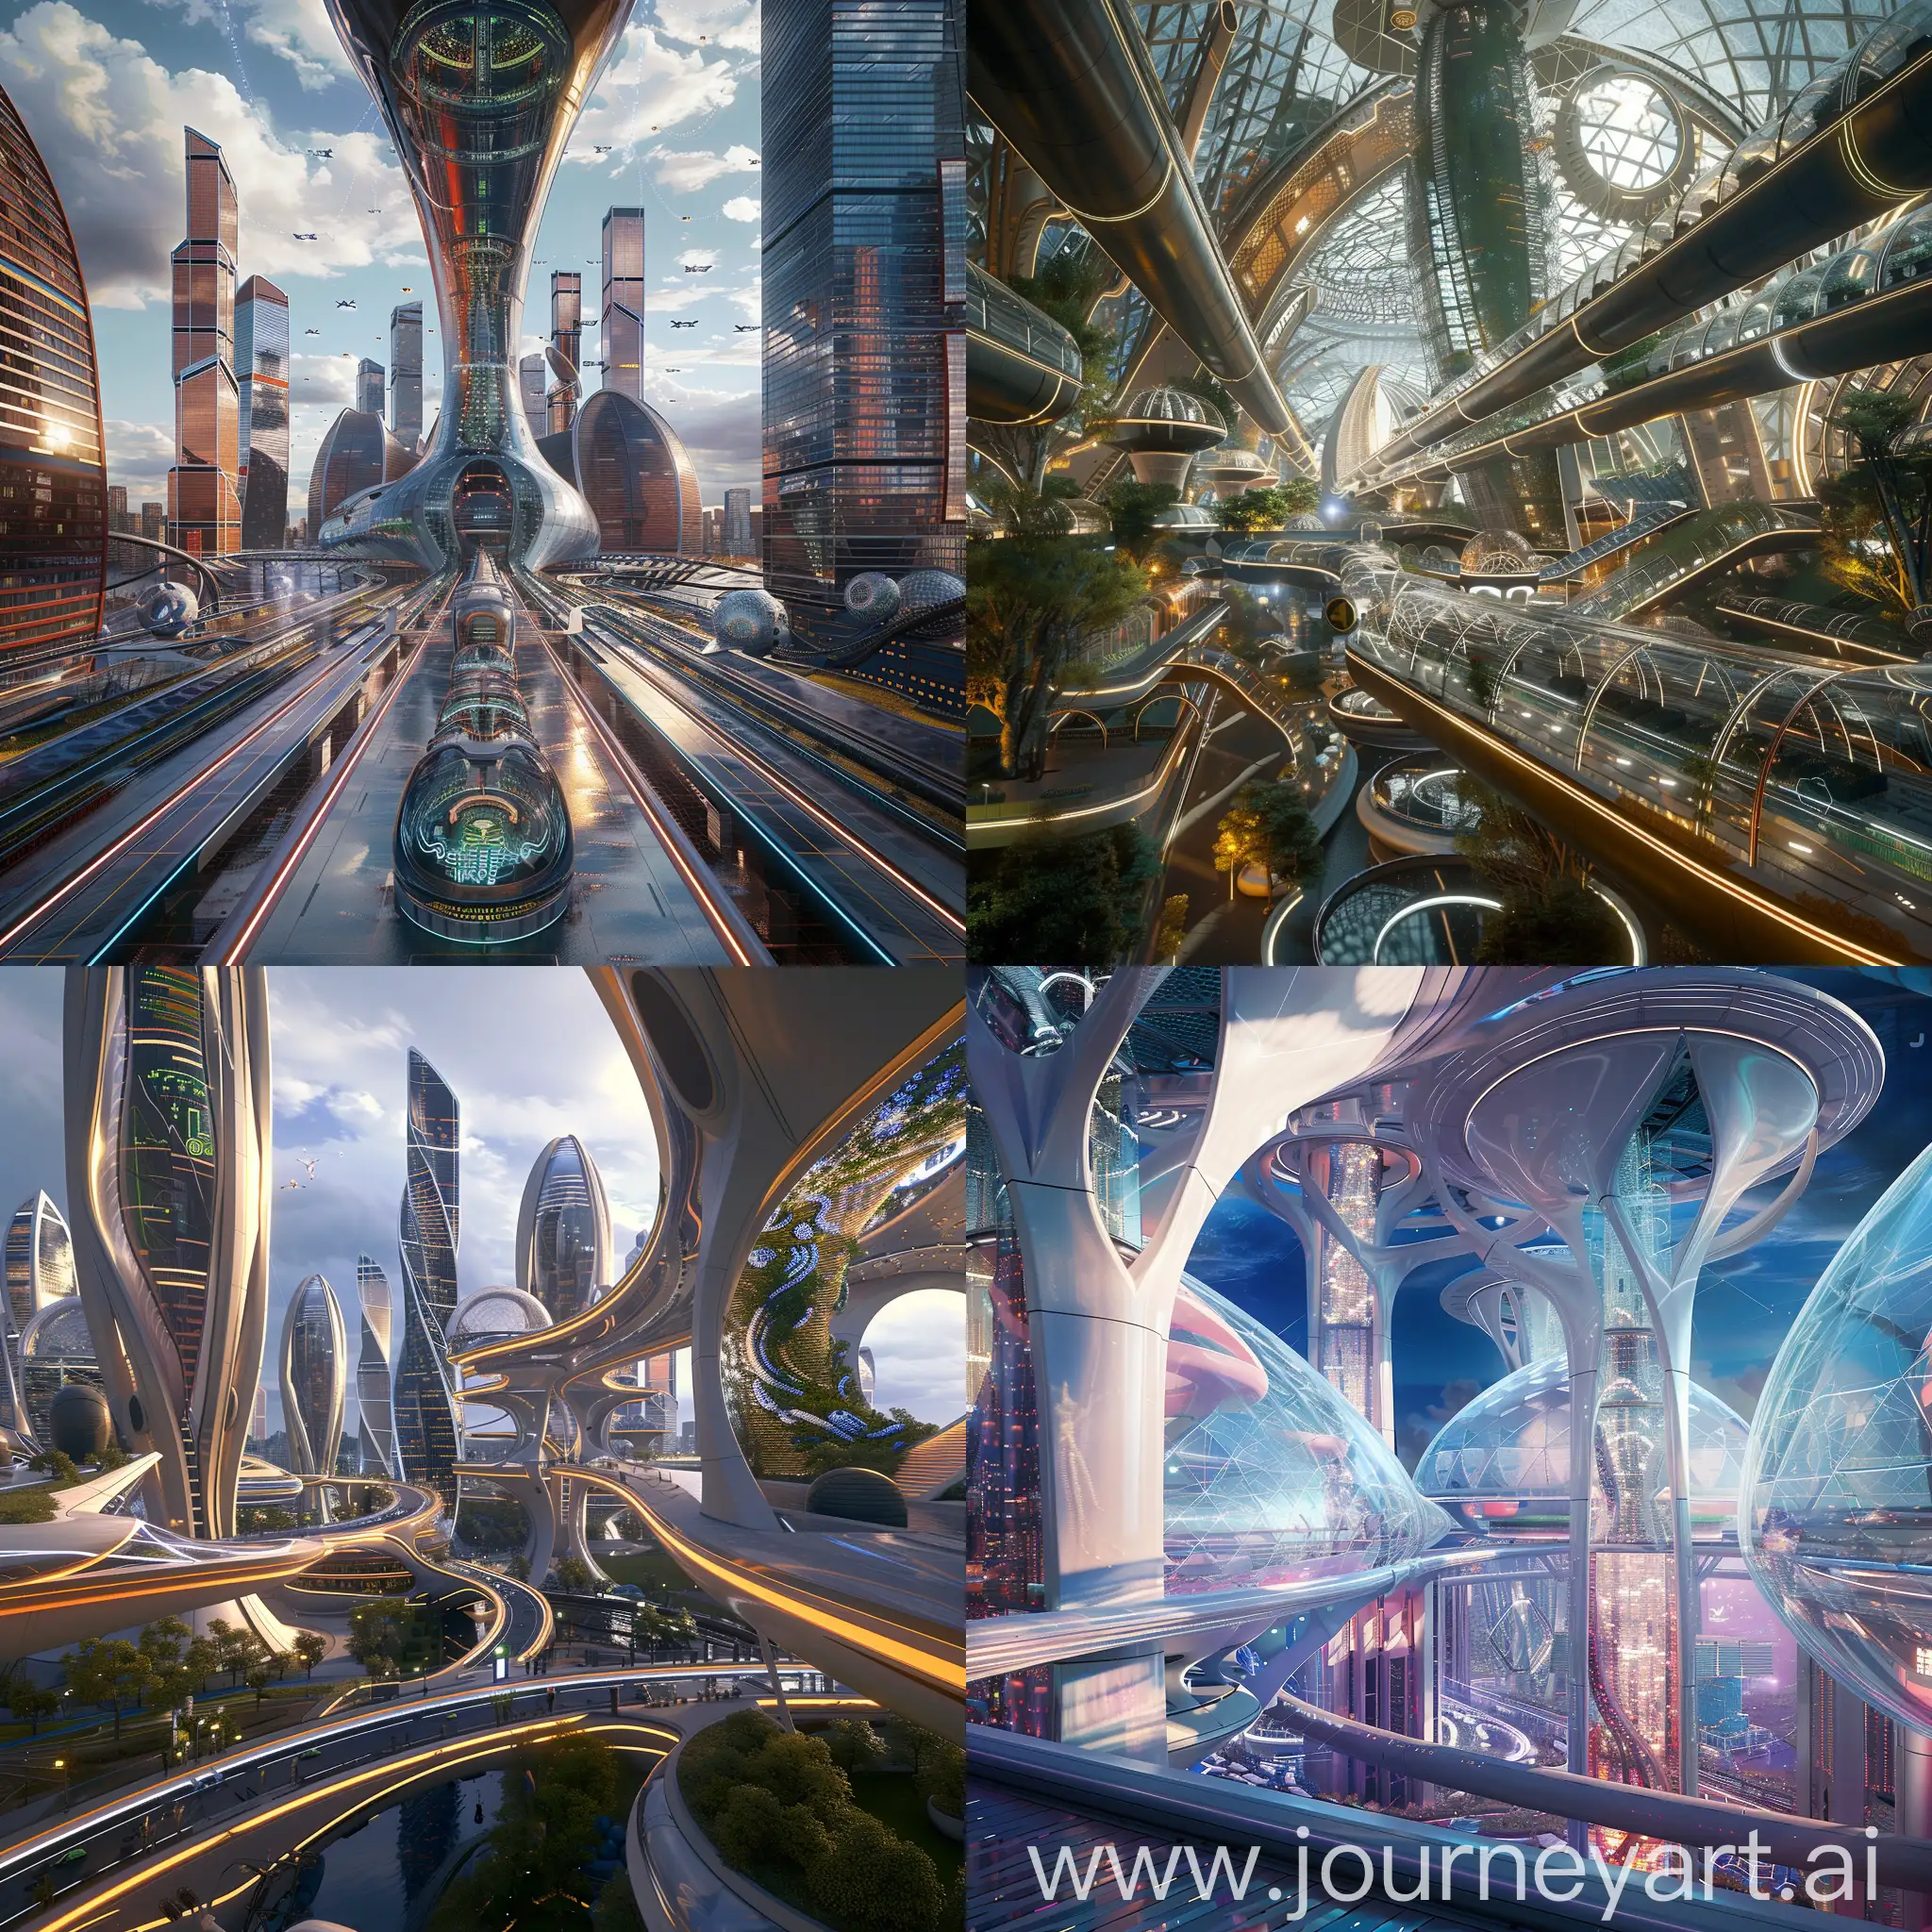 Futuristic Moscow, Neuro-Wires (inspired by Deus Ex: Human Revolution), Bio-Organic Power Cells (inspired by Cyberpunk 2077), Nanotech Repair Systems (inspired by Horizon: Zero Dawn), Hyperconductive Transit Tubes (inspired by Futurama), Hydroponic Vertical Gardens (inspired by Cloudpunk), Adaptive Climate Control (inspired by Mirror's Edge: Catalyst), Kinetic Energy Harvesting Floors (inspired by Syndicate Wars), Modular Reconfigurable Interiors (inspired by Ghostrunner), Holographic Information Displays (inspired by Minority Report), AI-Powered Predictive Maintenance (inspired by Ghost in the Shell), Kinetic Facades (inspired by Akira), Vertical Eco-Towers (inspired by Avatar), Atmospheric Filtration Towers (inspired by Elysium), Skytram Networks (inspired by BioShock Infinite), Underwater City Expansion (inspired by Rapture - BioShock), Seawall Power Plants (inspired by Waterworld), Smart Traffic Management Systems (inspired by Detroit: Become Human), Weather-Shielding Domes (inspired by Logan), Automated Drone Delivery Networks (inspired by Death Stranding), Hyperloop Terminals (inspired by The Matrix), unreal engine 5 --stylize 1000